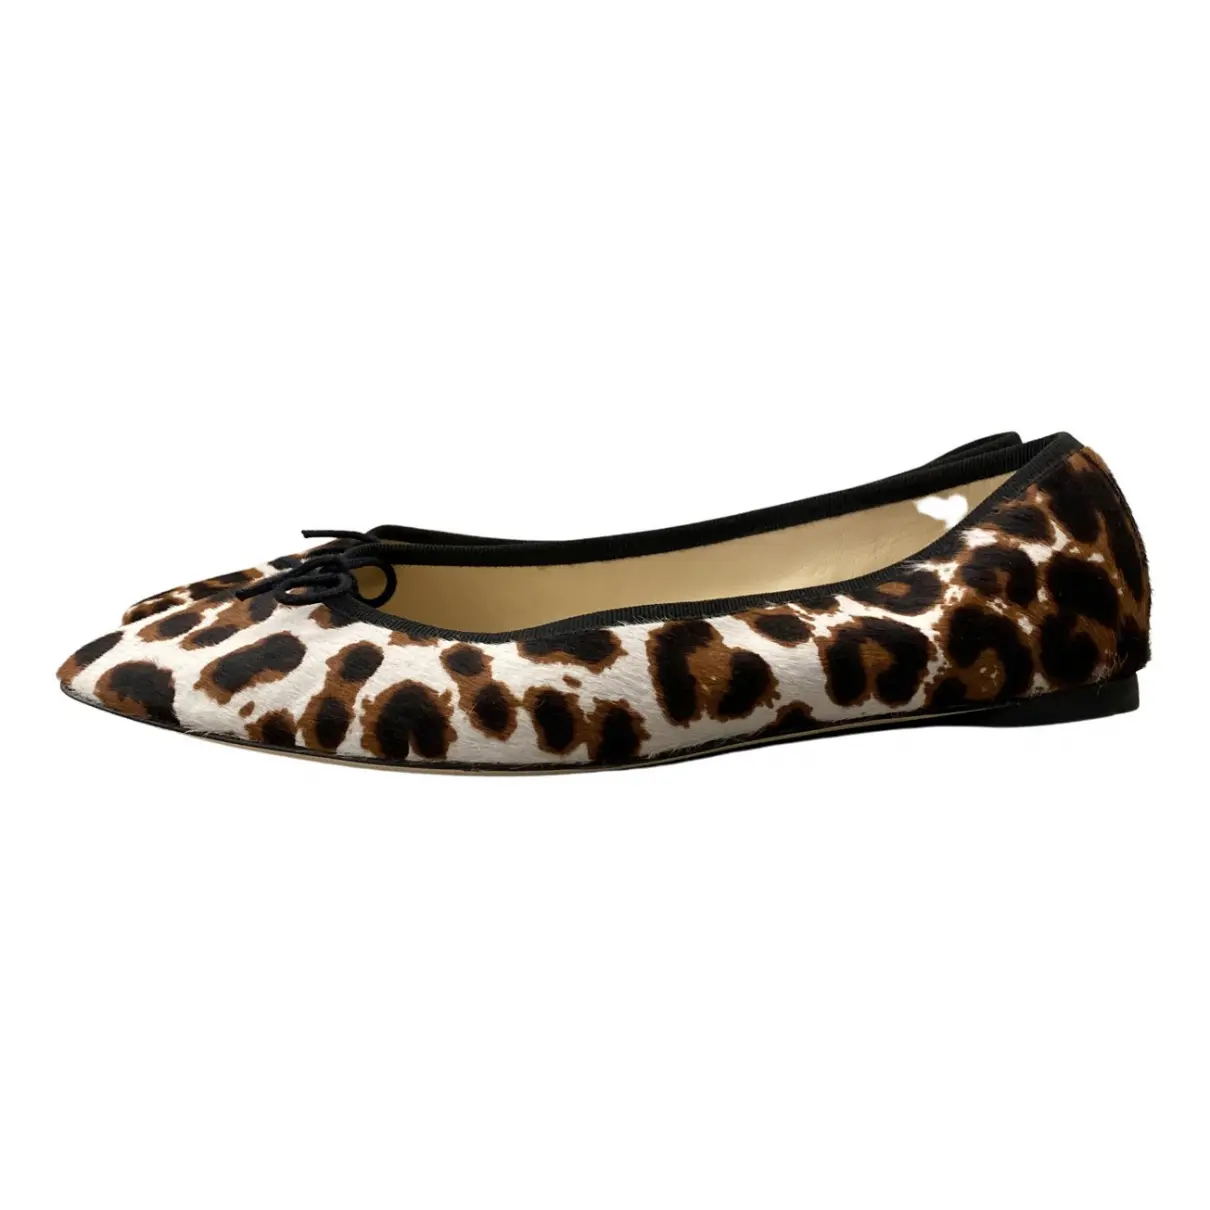 Pony-style calfskin ballet flats Repetto